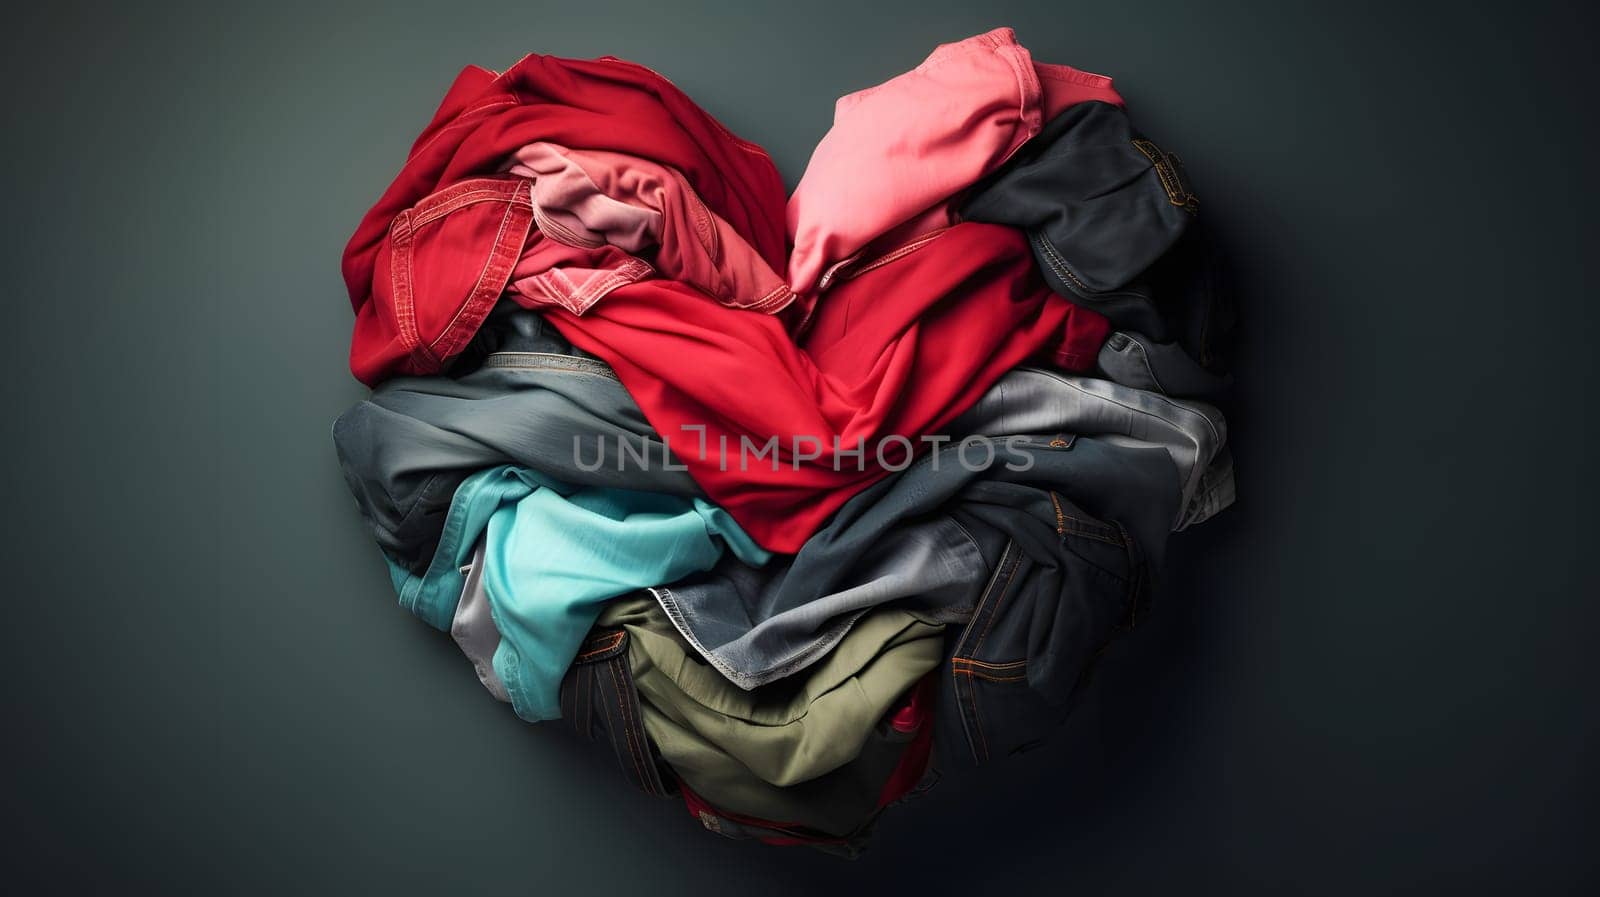 used clothes folded to form a heart on grey background, neural network generated photorealistic image by z1b